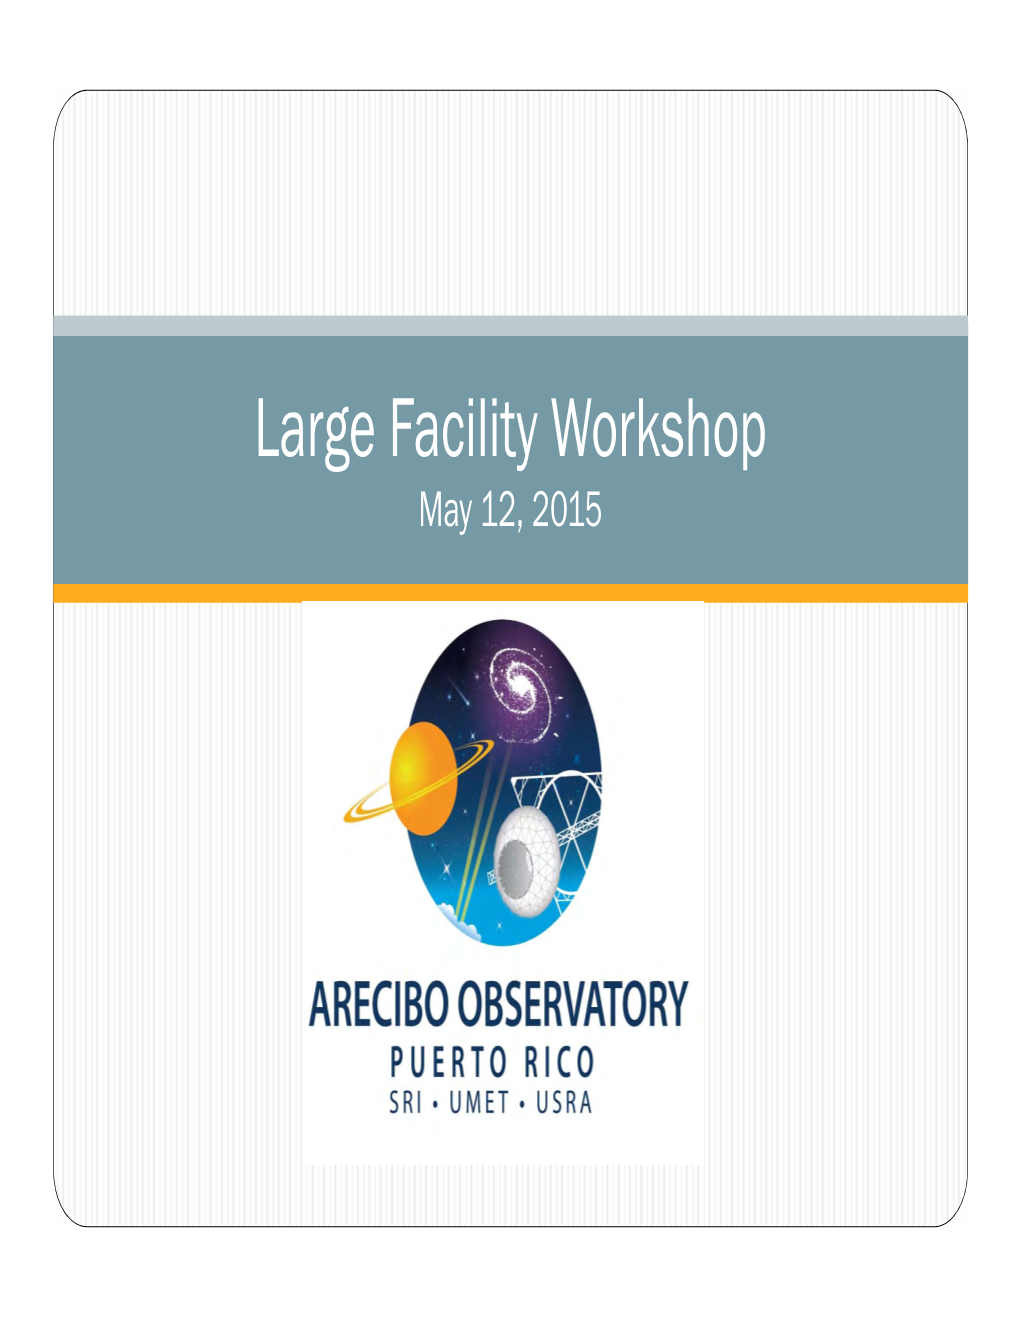 Large Facility Workshop May 12, 2015 Welcome to Arecibo Observatory Background, and What to Expect